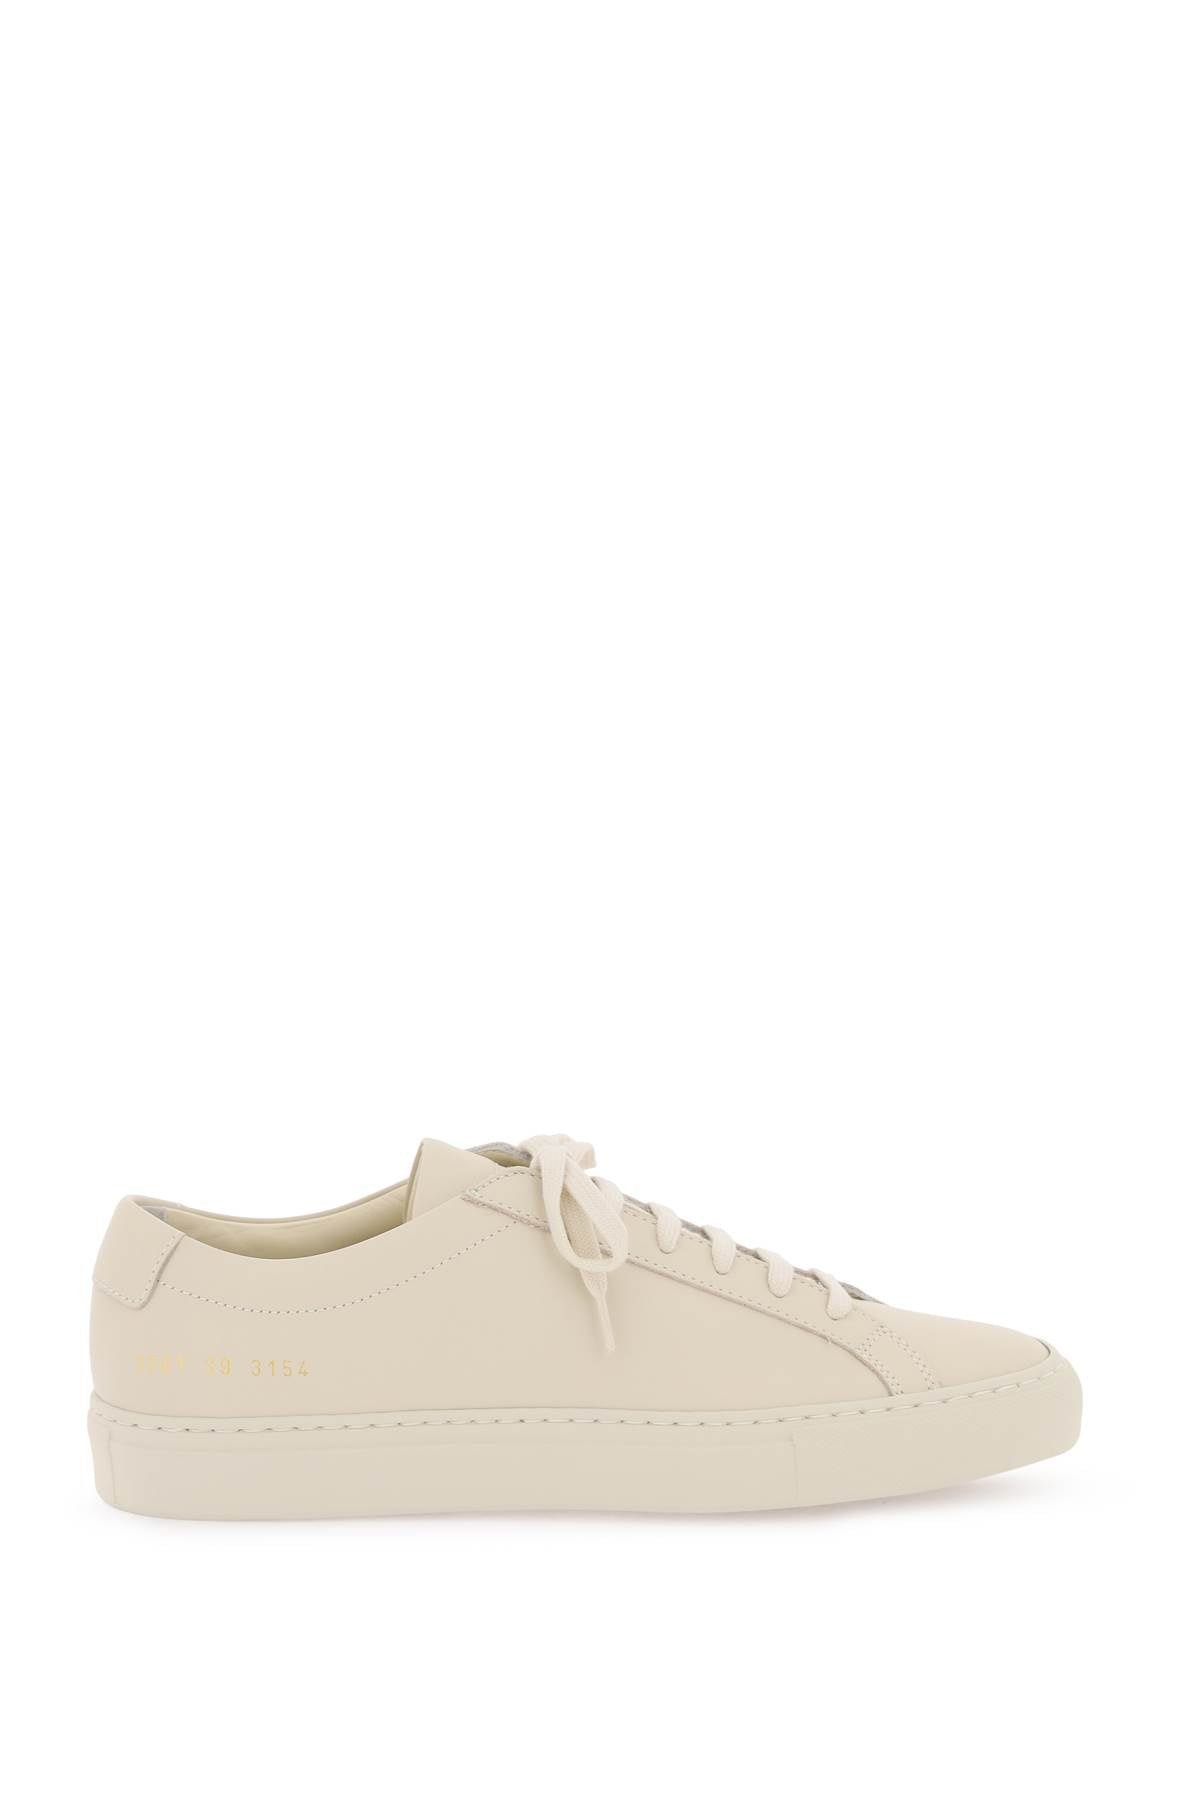 Beige Leather Sneakers with Gold-Tone Accents